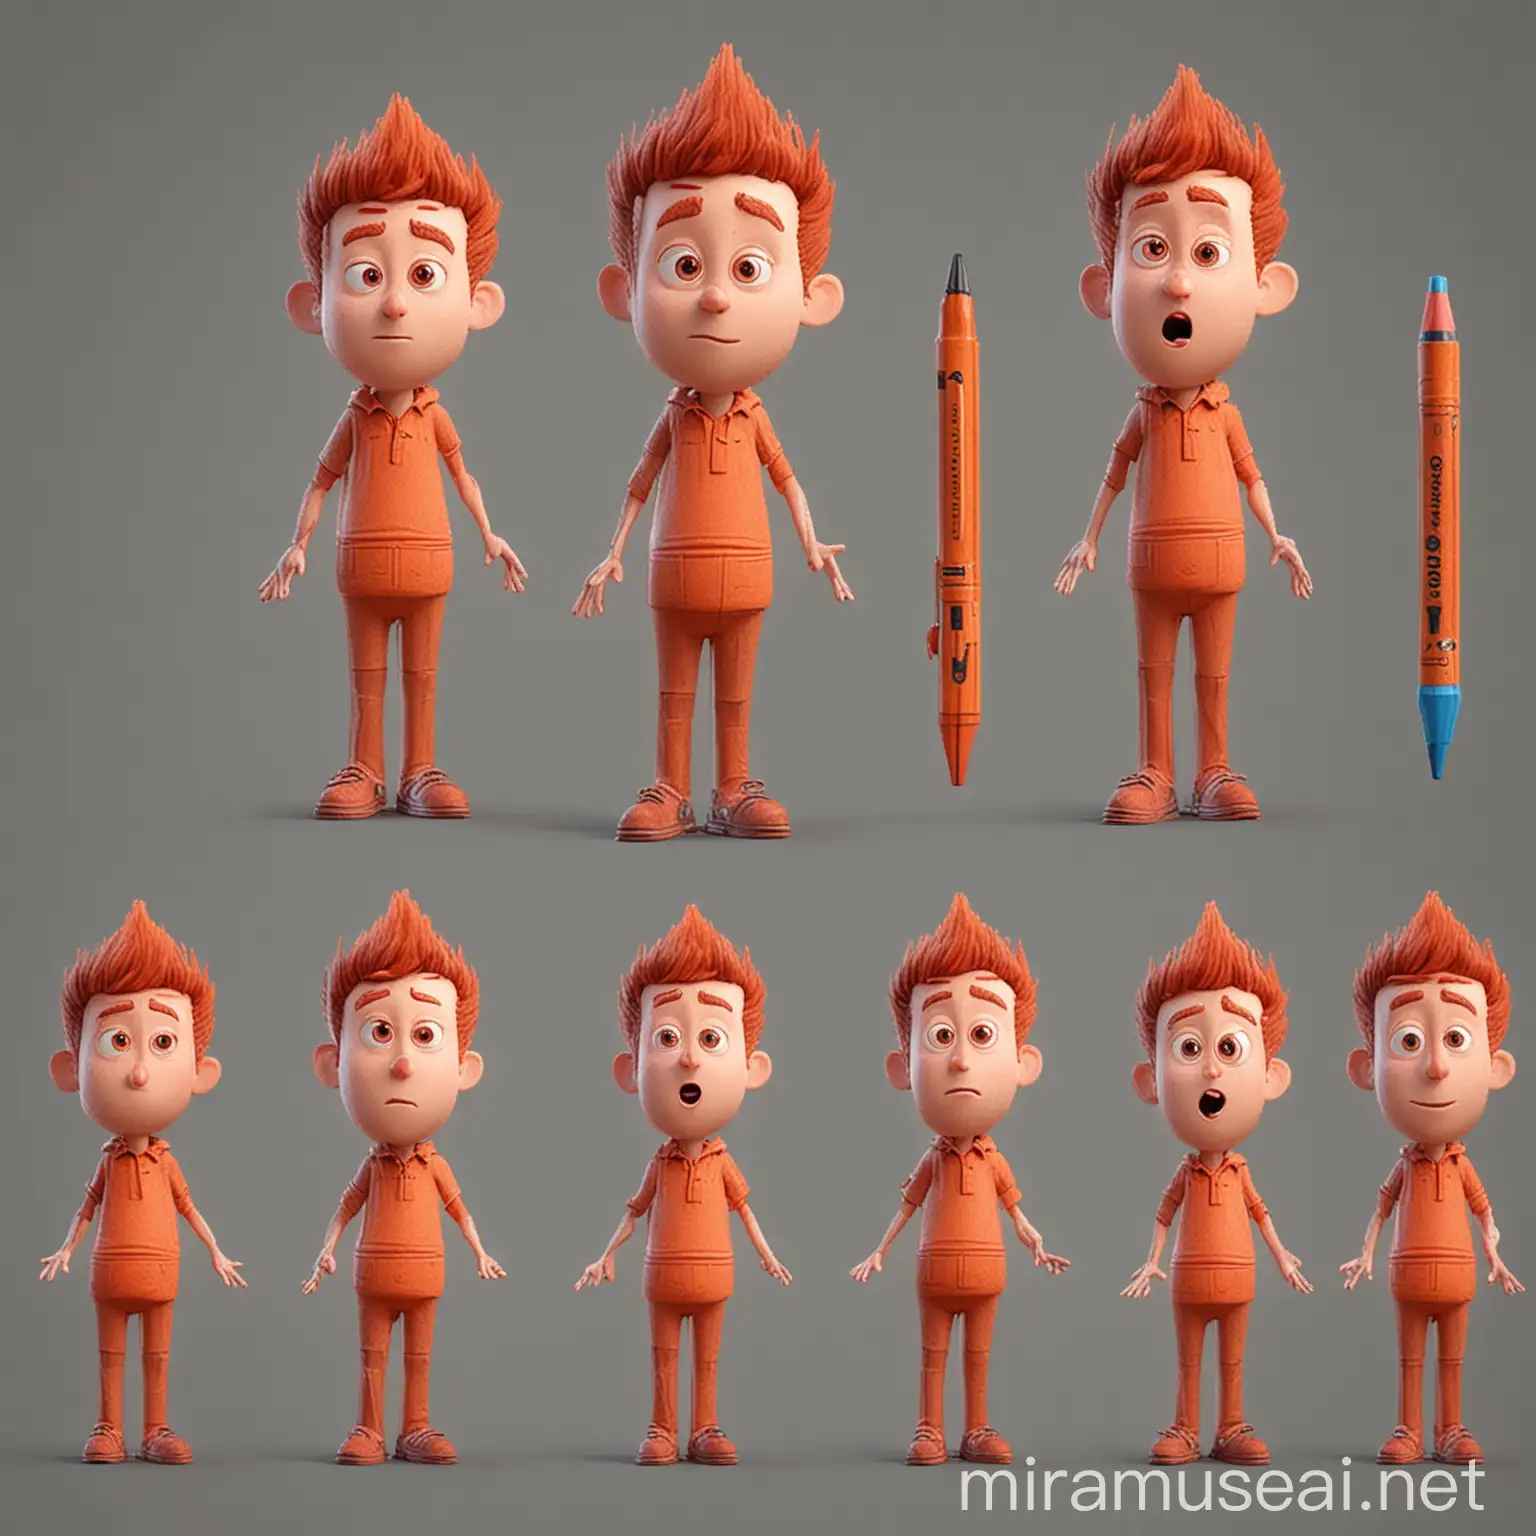 Colorful Crayon Character in 3D A Playful Addition to Kids Stories